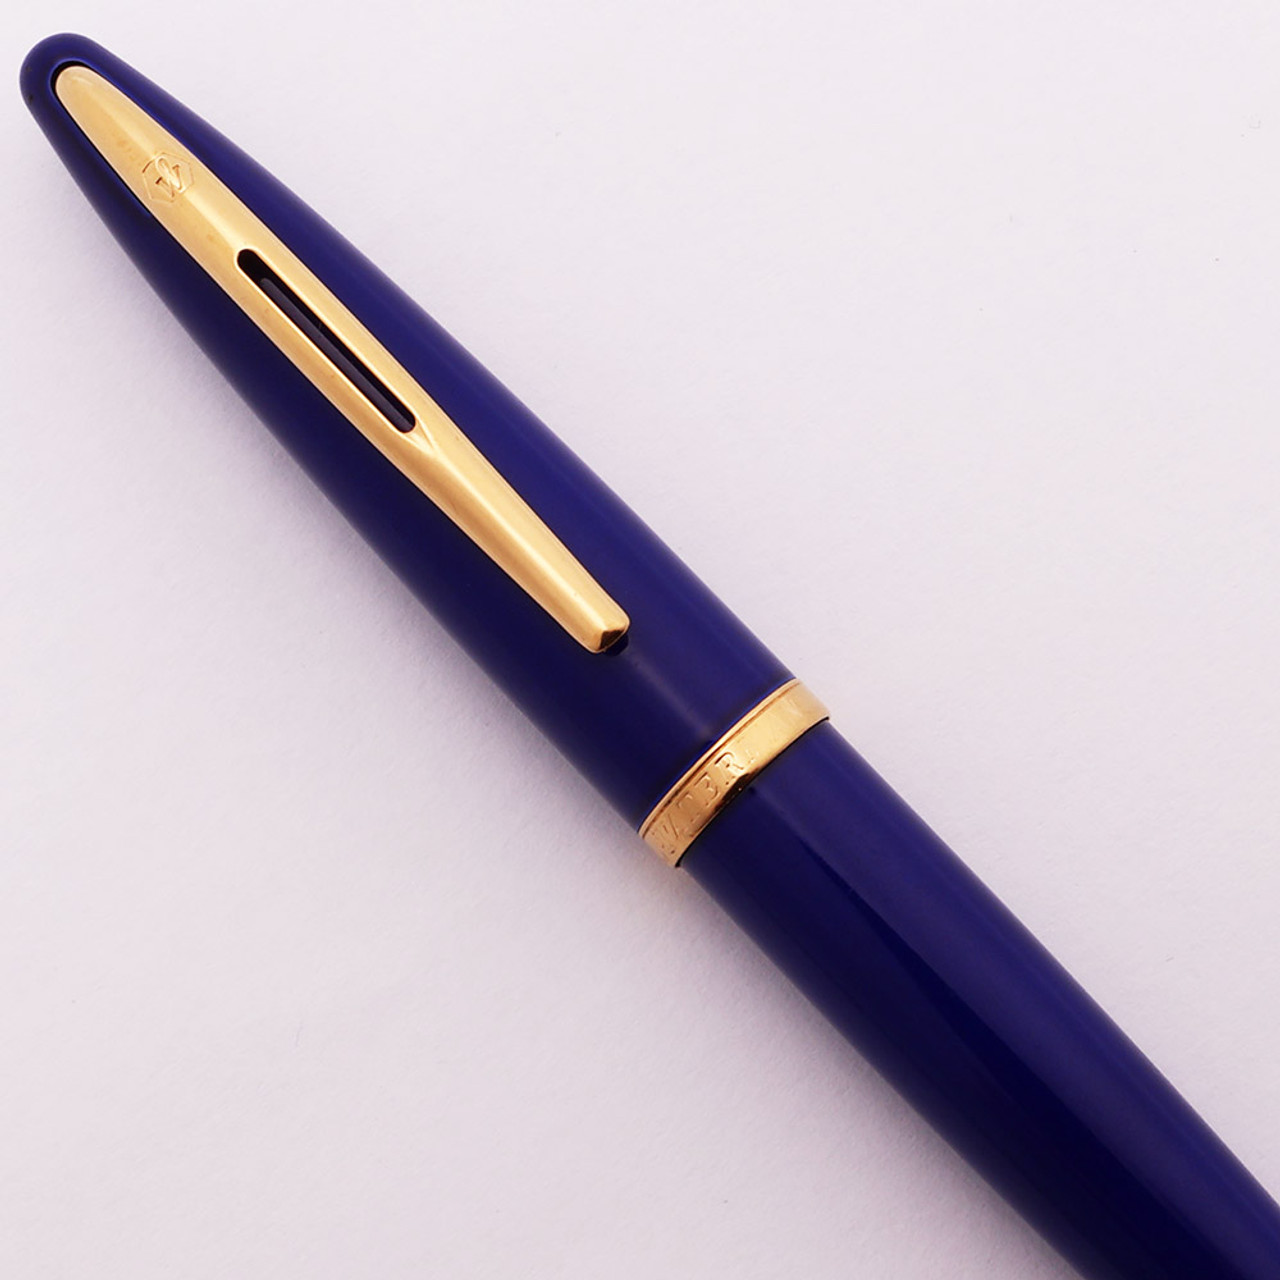 Waterman Carene Ballpoint Pen - Abyss Blue, Gold Trim (Excellent, Works Well)